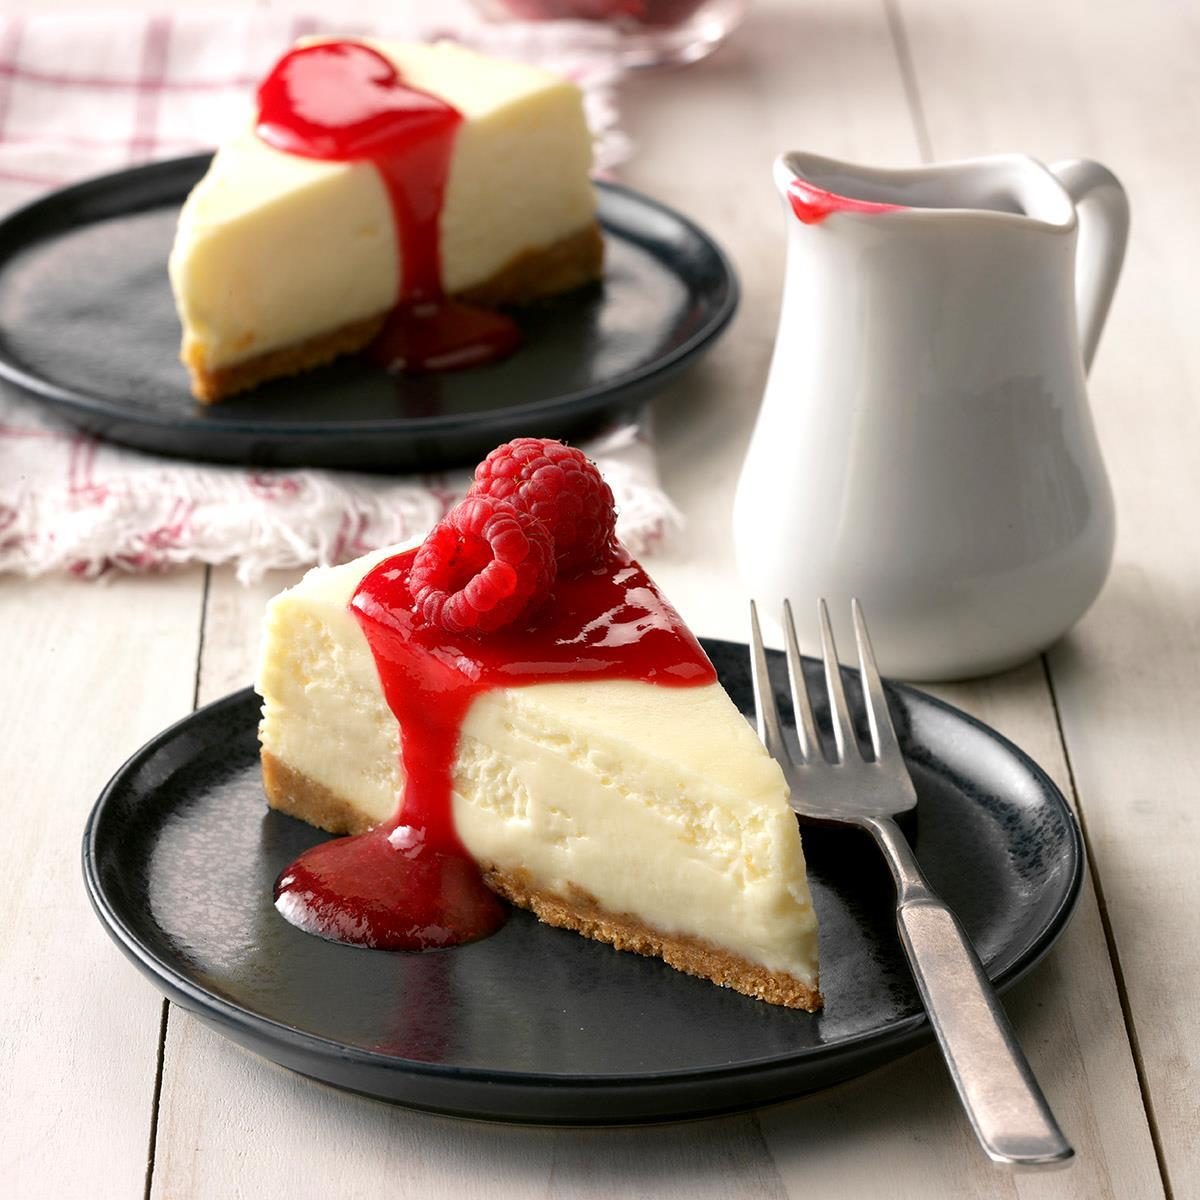 Traditional Cheesecake Recipe How To Make It